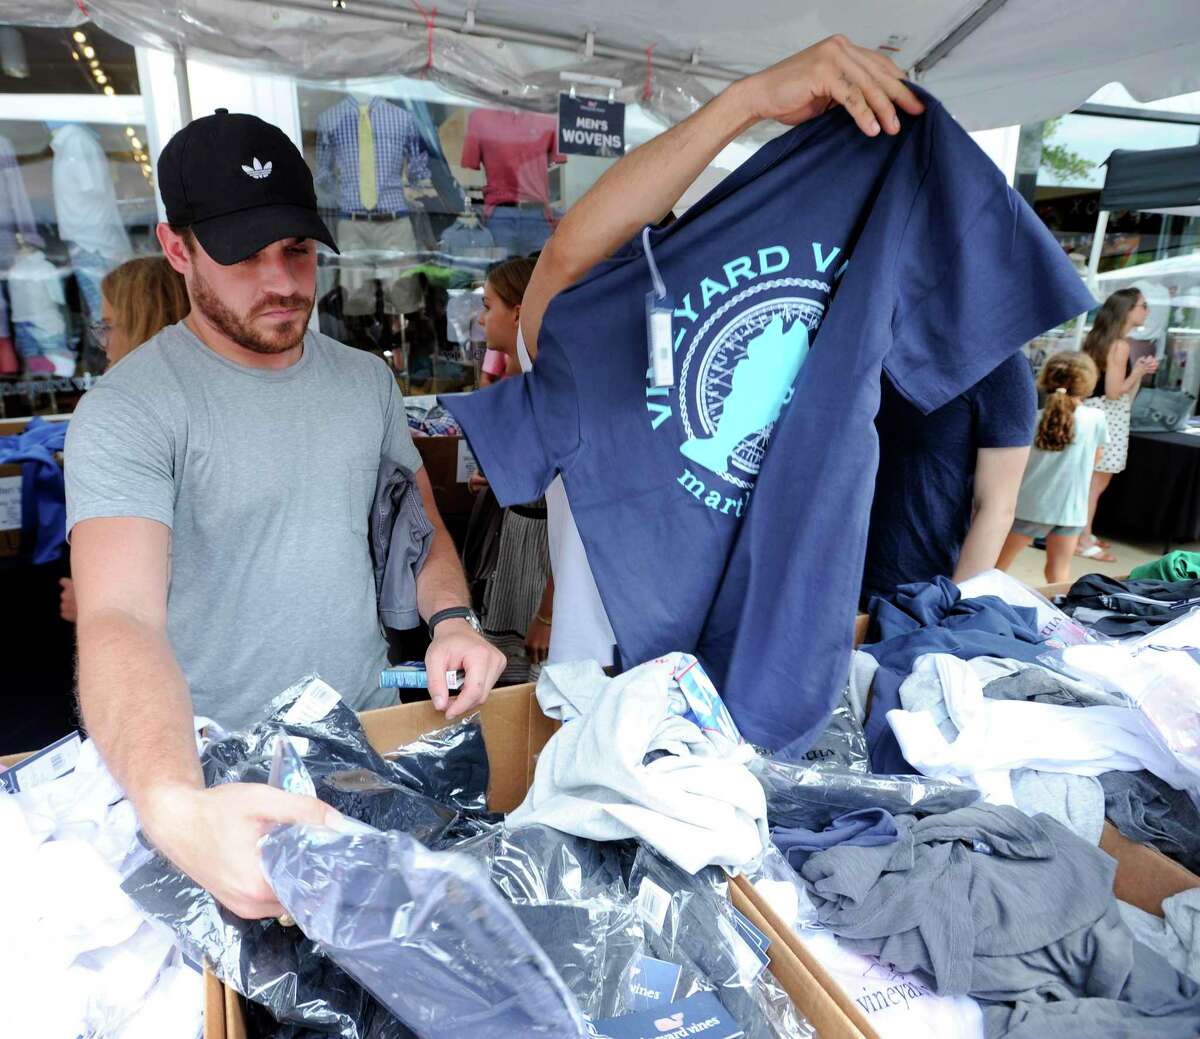 Austin West of Dallas hunts for a bargain at Vineyard Vines as he shops local retailers during the Chamber of Commerce Sidewalk Sales Day in Greenwich, Conn. on July 11, 2019.